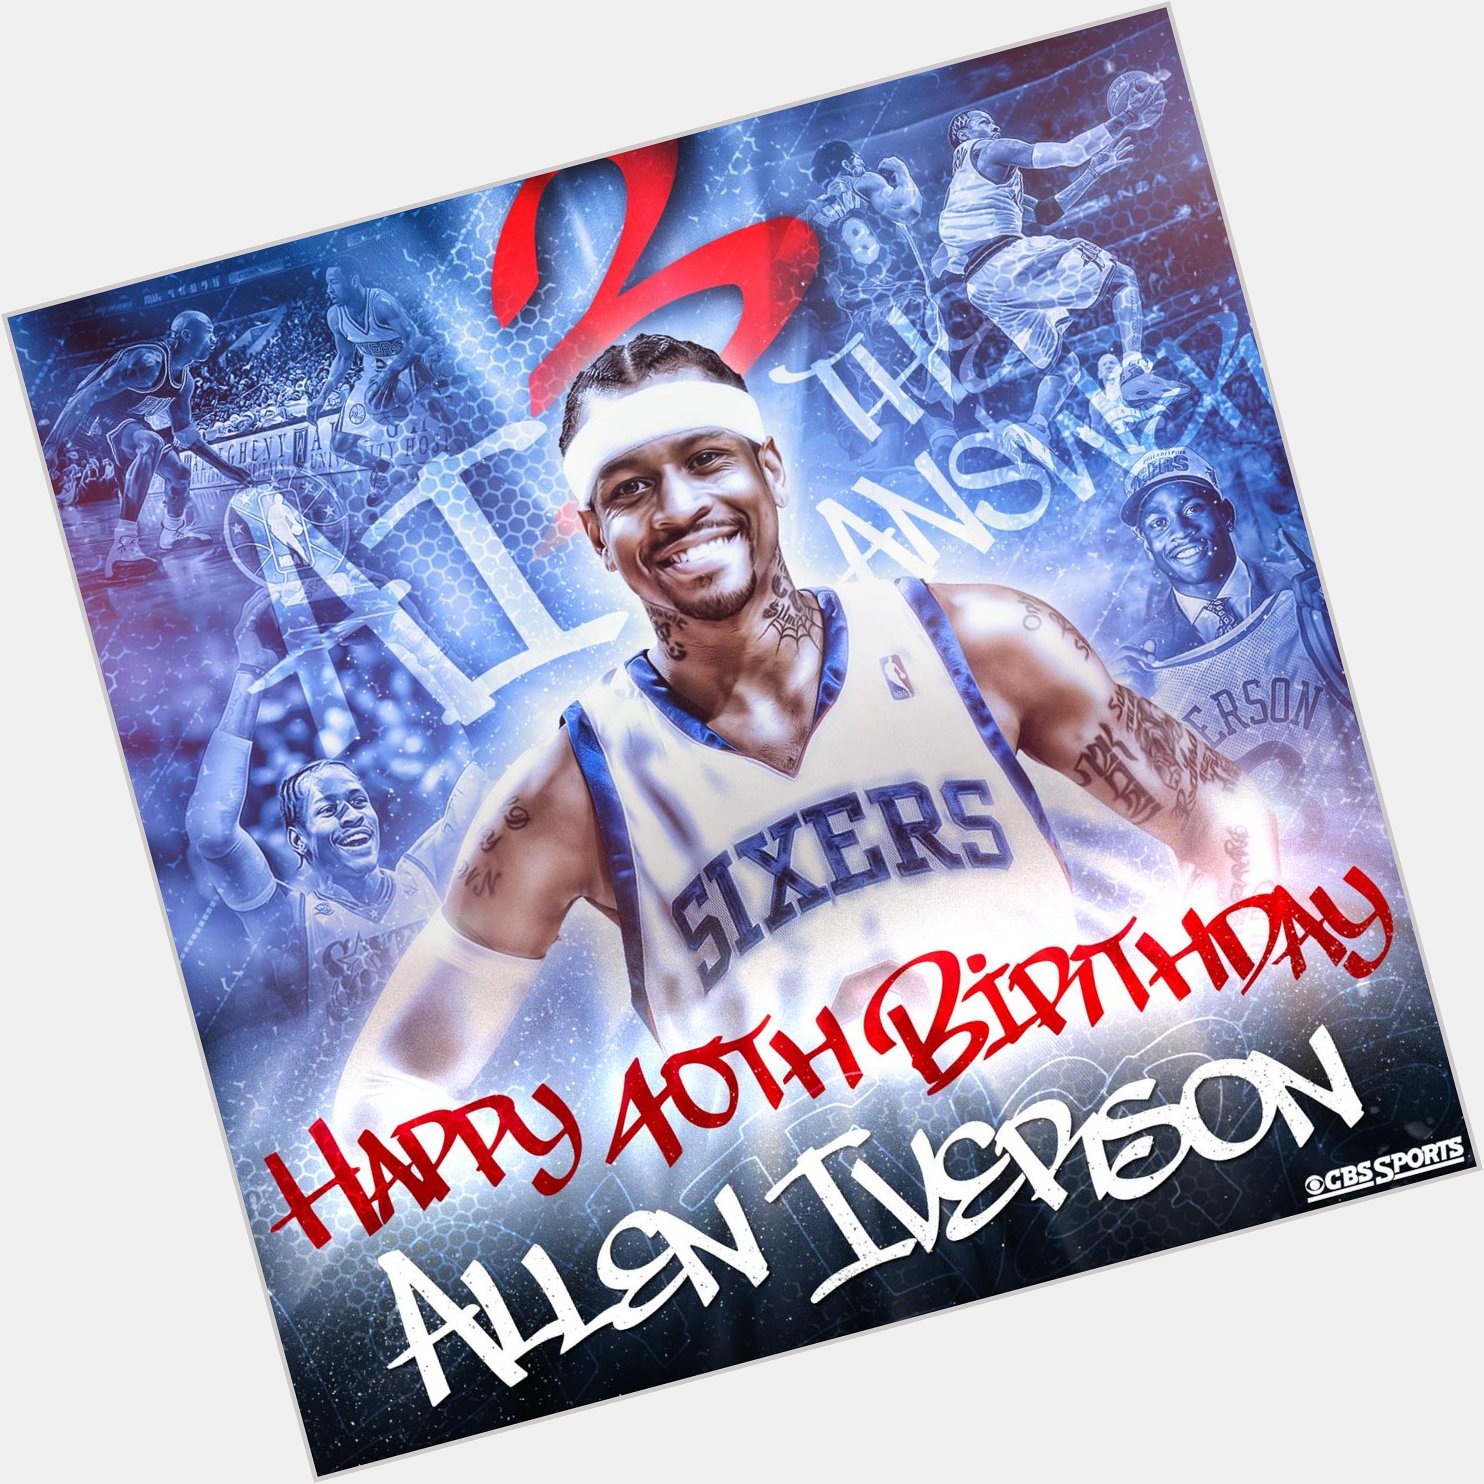 Allen Iverson and I are both 40! \" Happy 40th birthday to one of the most exciting NBAers, 